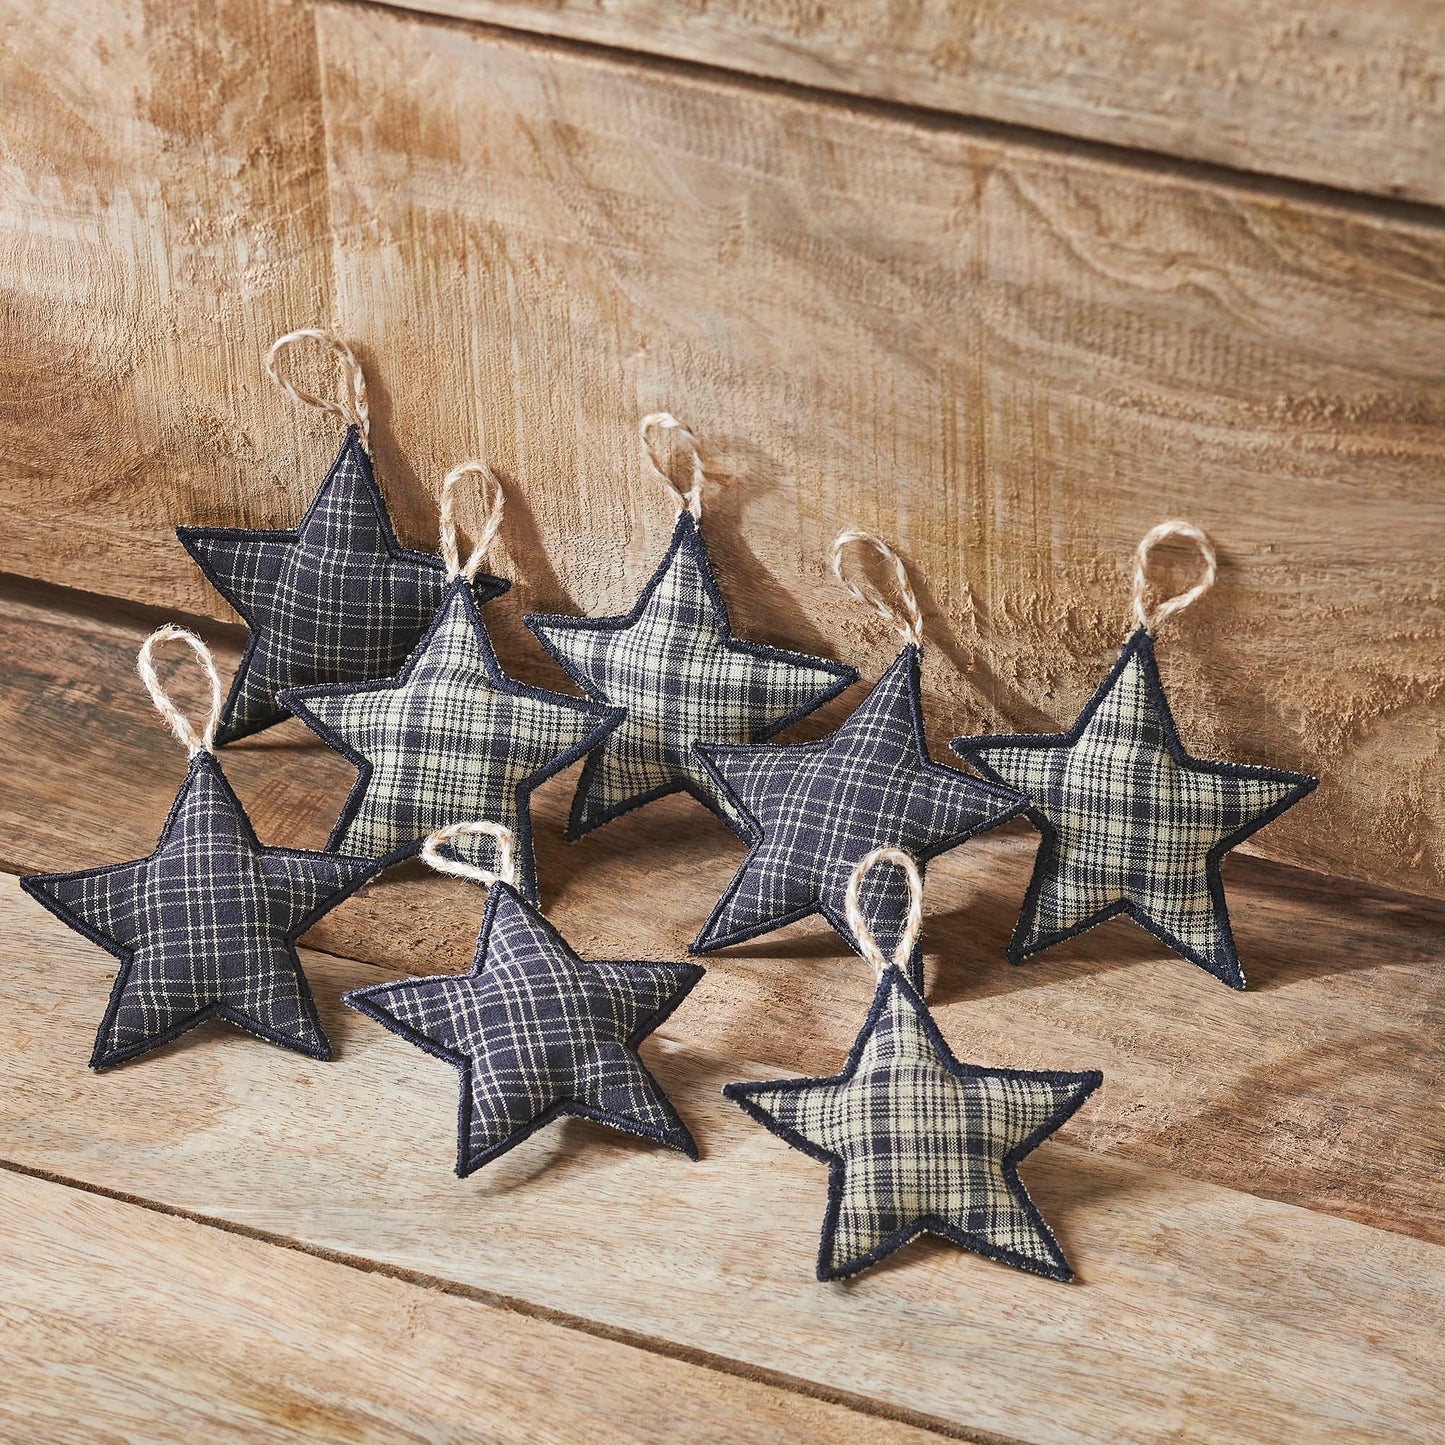 My Country Star Ornament Bowl Filler Set of 8 3.5x3.5 SpadezStore